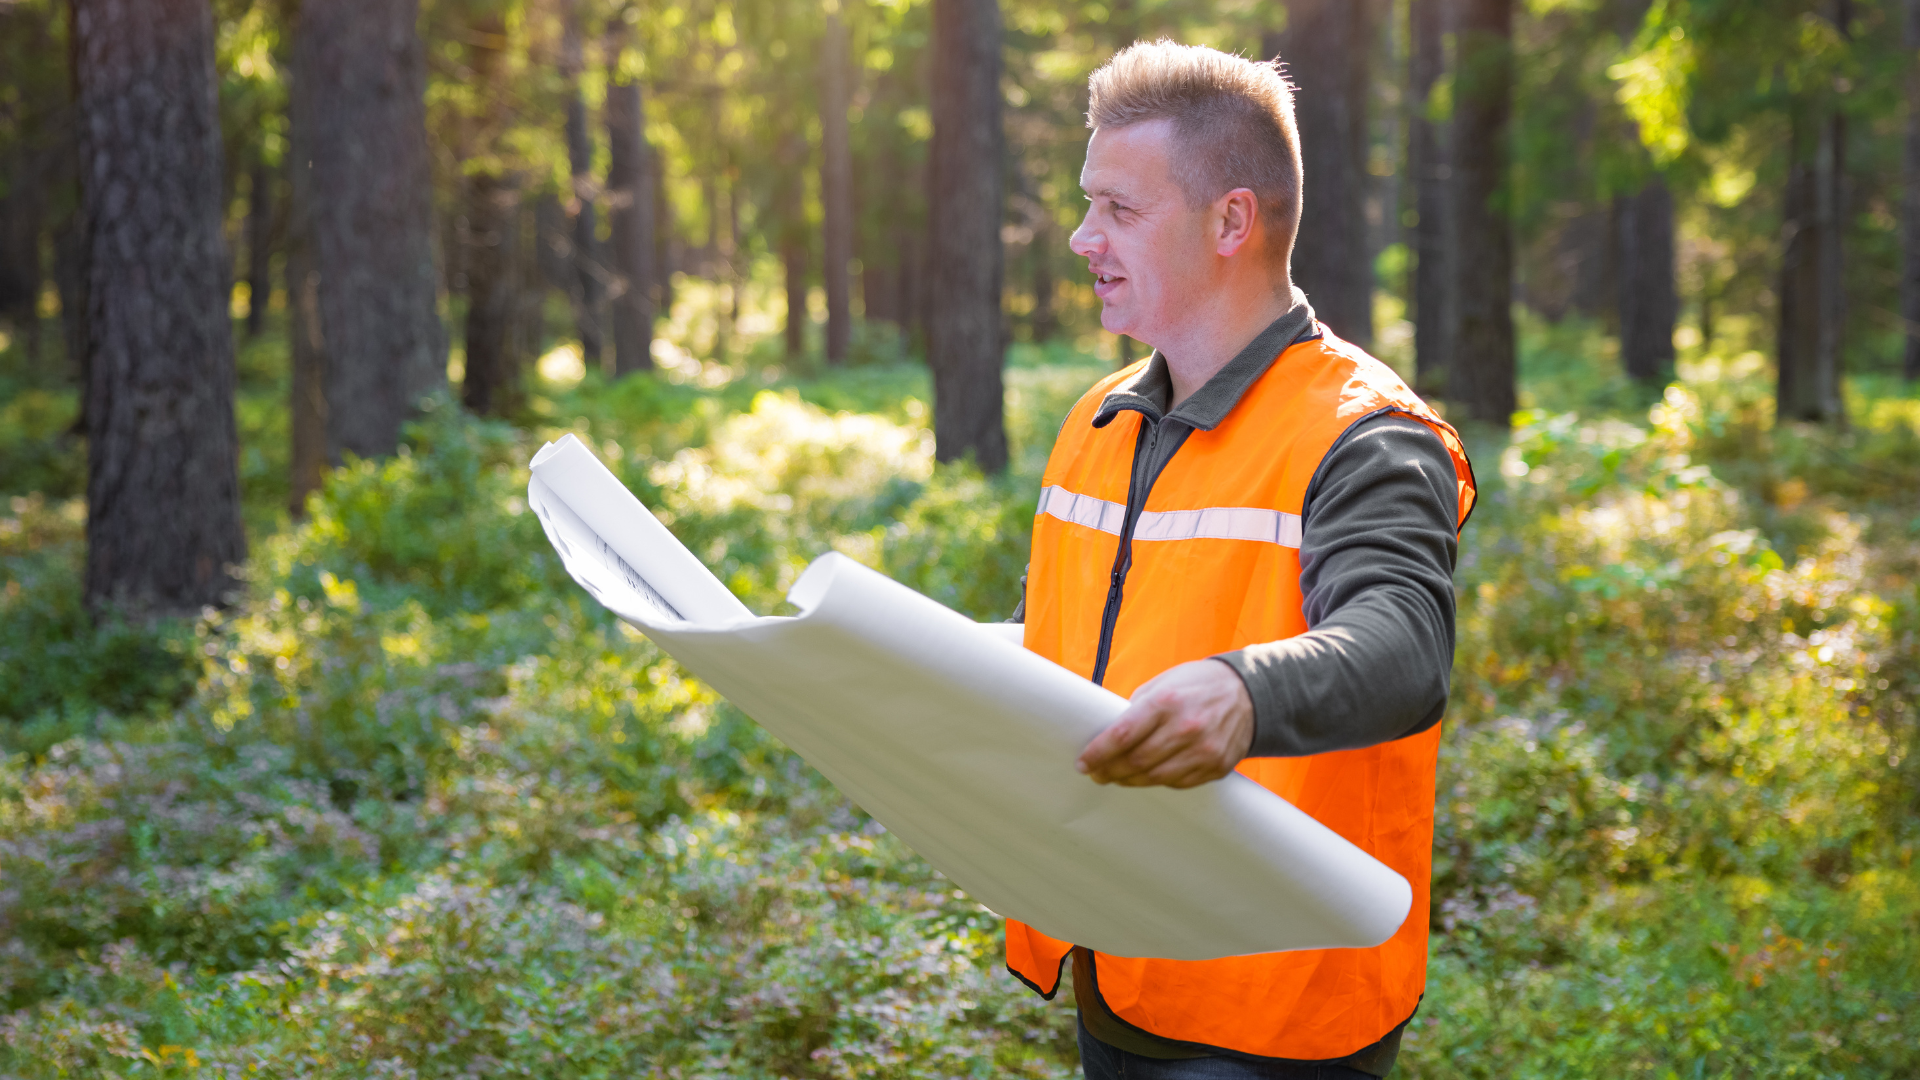 A man in a high-vis jacket looking at engineering plans in a forest